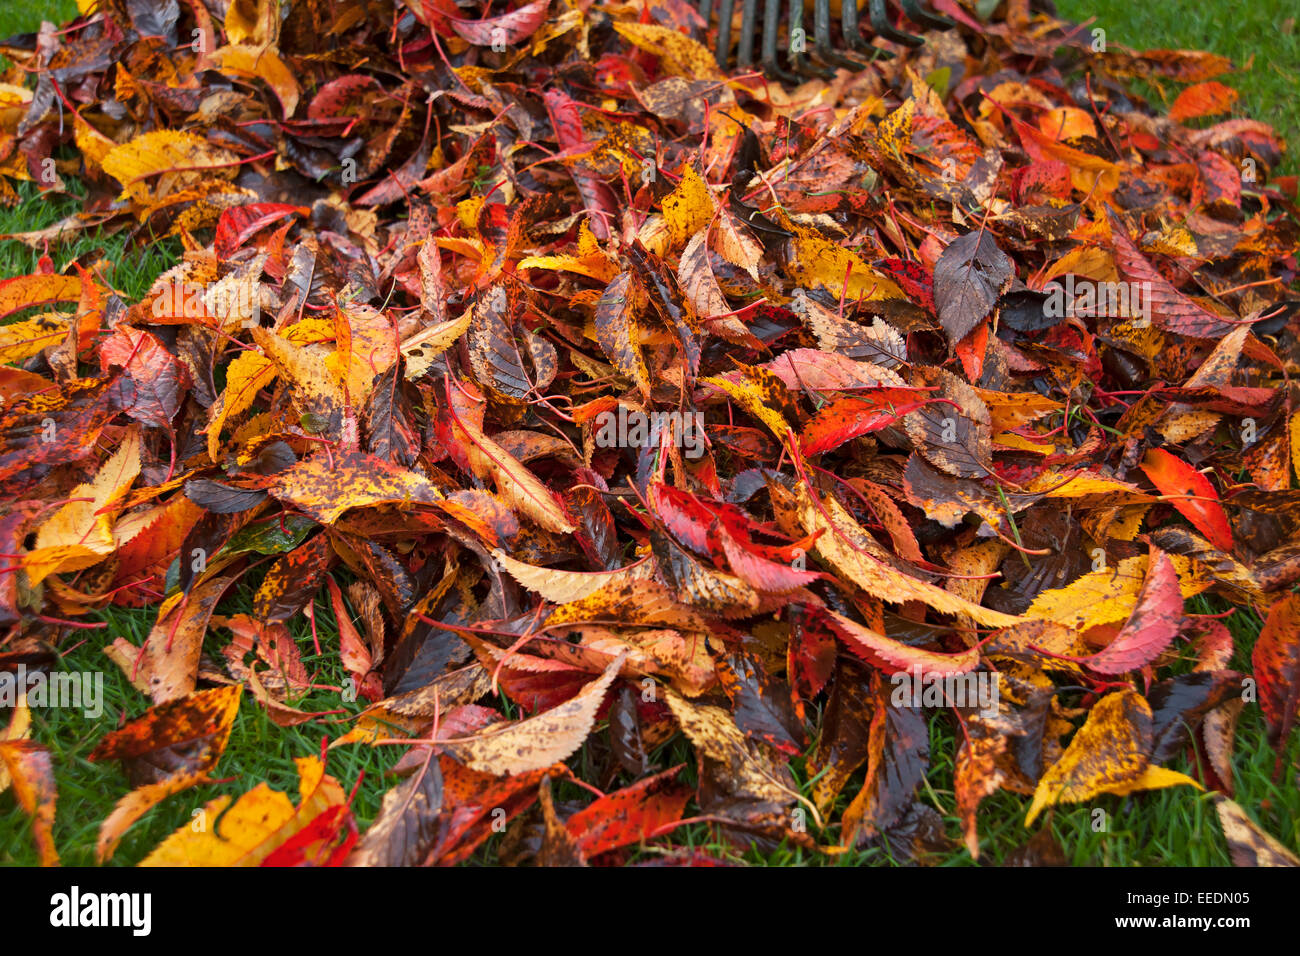 Close up of a pile of colourful colorful fallen leaves in the garden in autumn York North Yorkshire England UK United Kingdom GB Great Britain Stock Photo